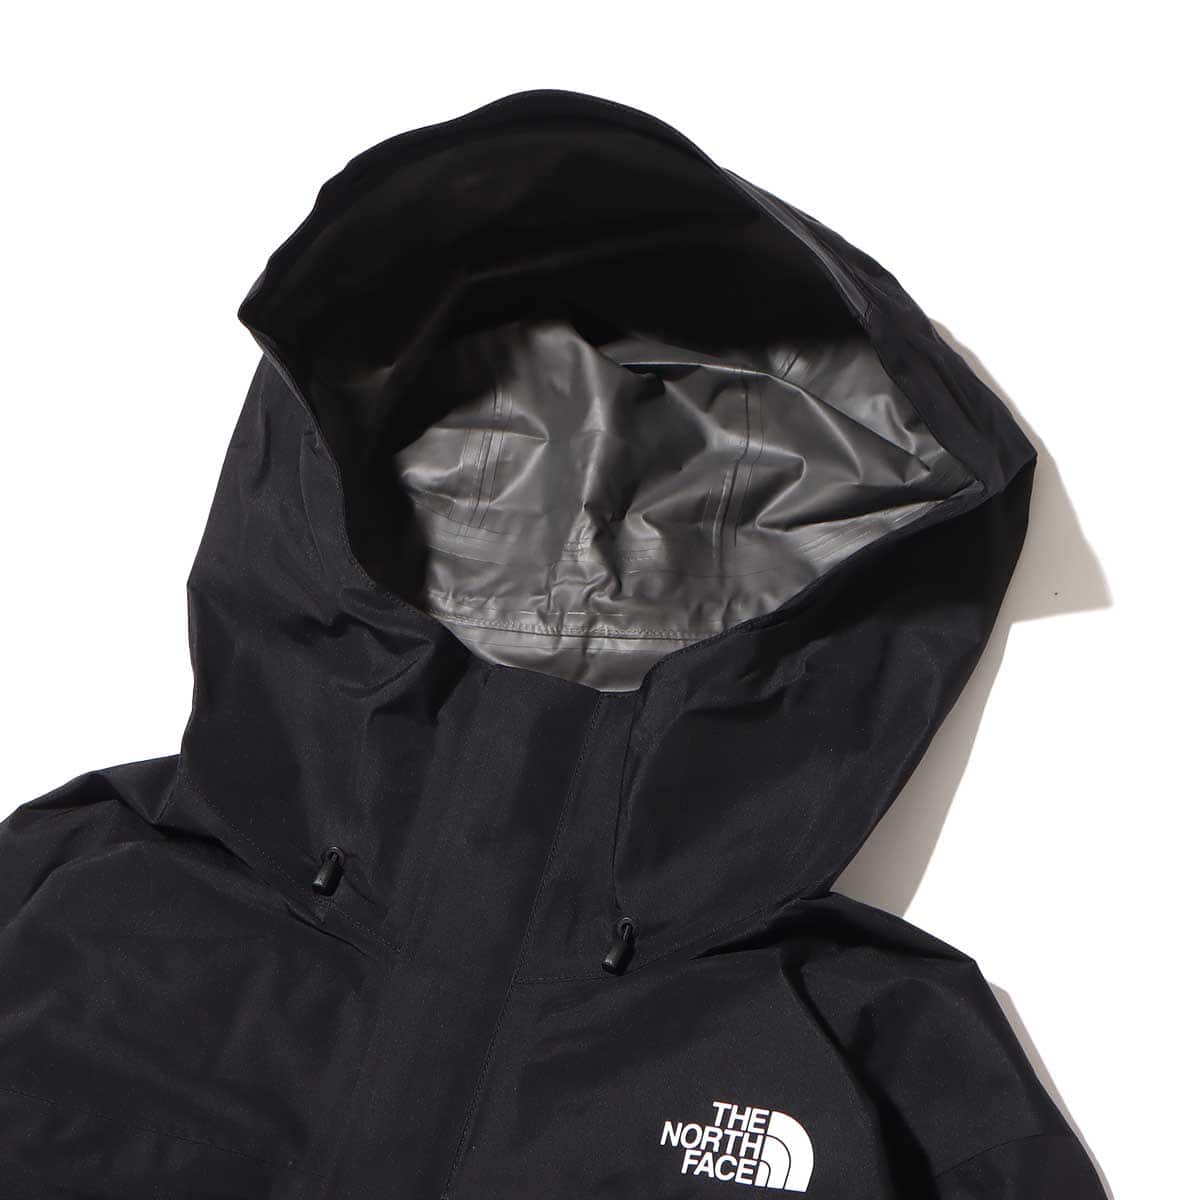 THE NORTH FACE CLOUD JACKET BLACK